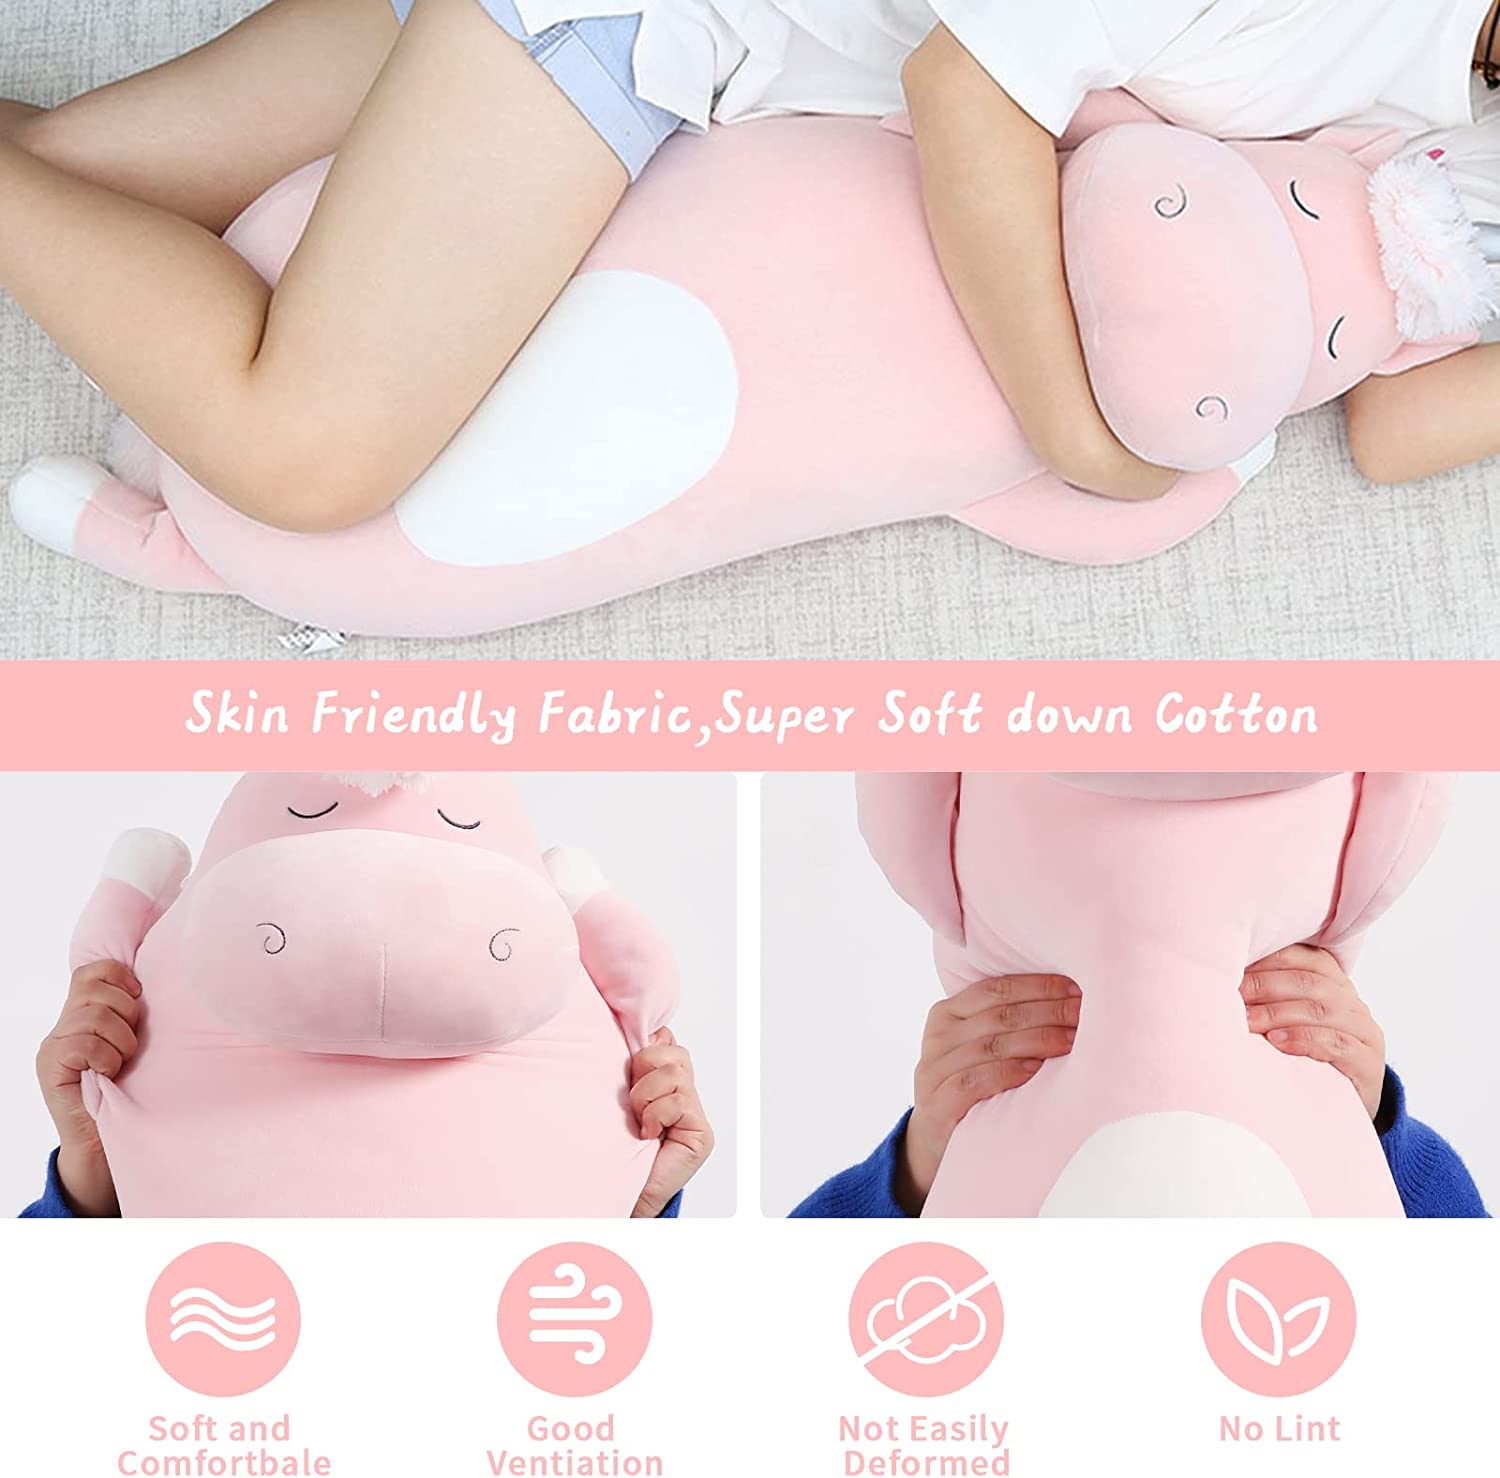 Giant Unicorn Body Pillow, Pink/Blue, 23.6/36.2 Inches